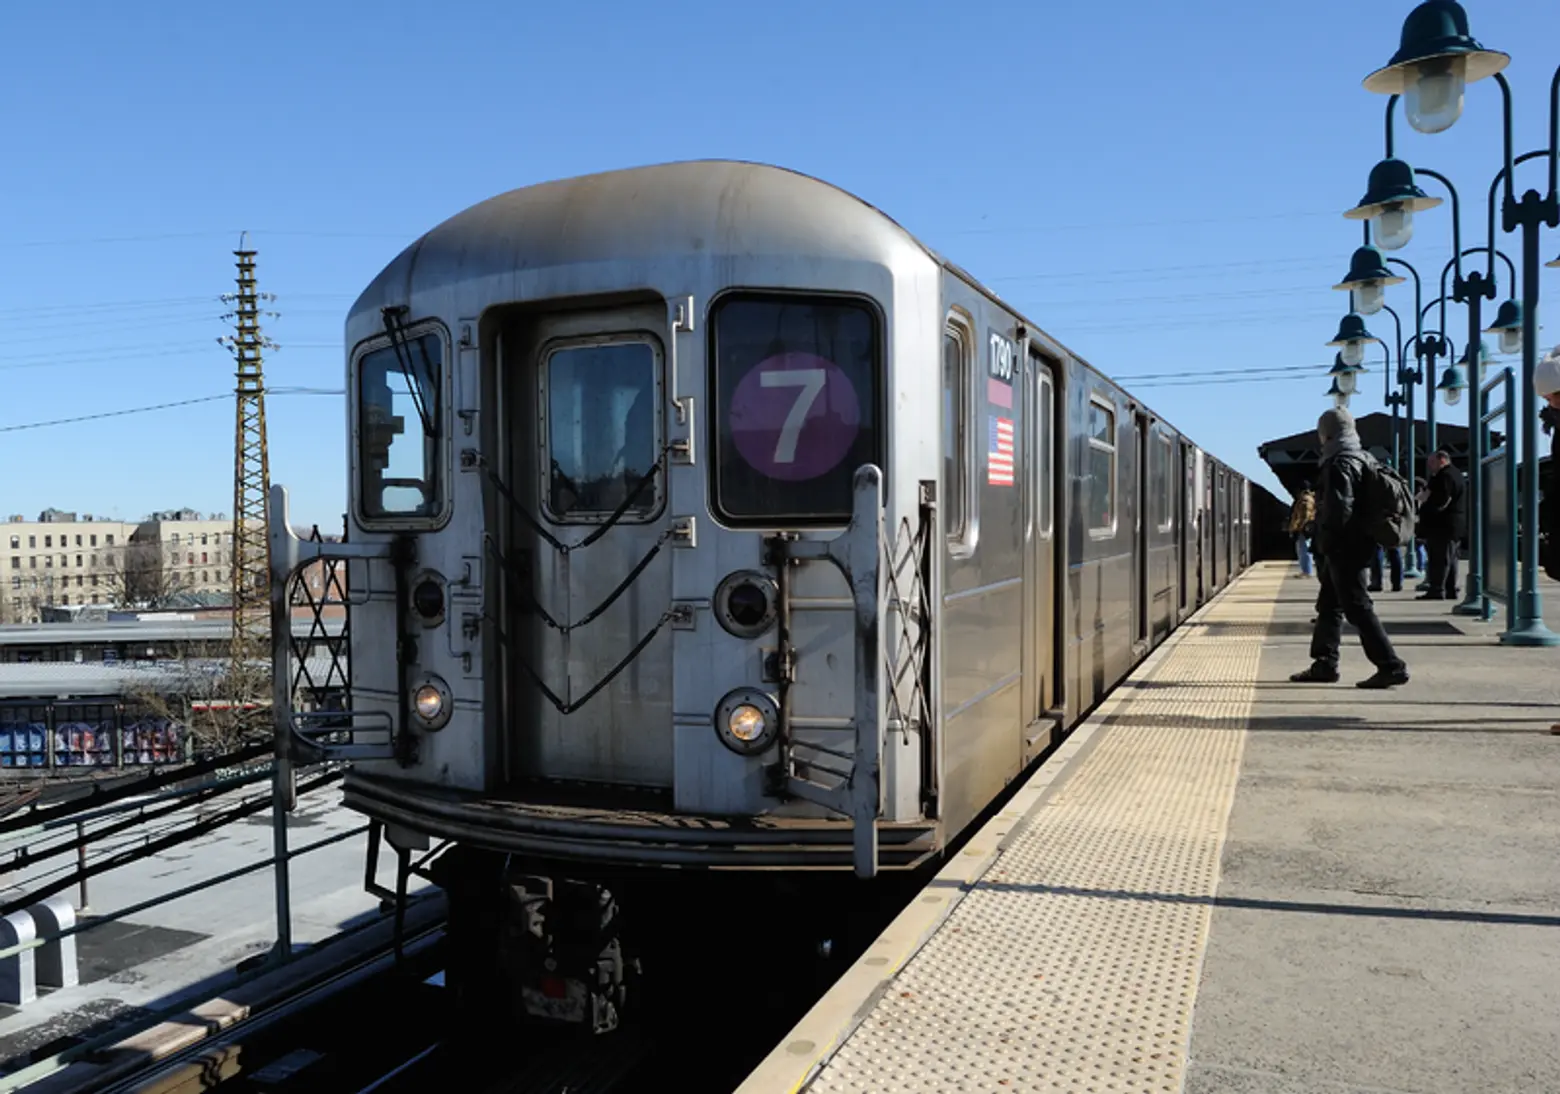 Should the 7 train get extended to NJ?; Harlem African Burial Ground memorial moves forward